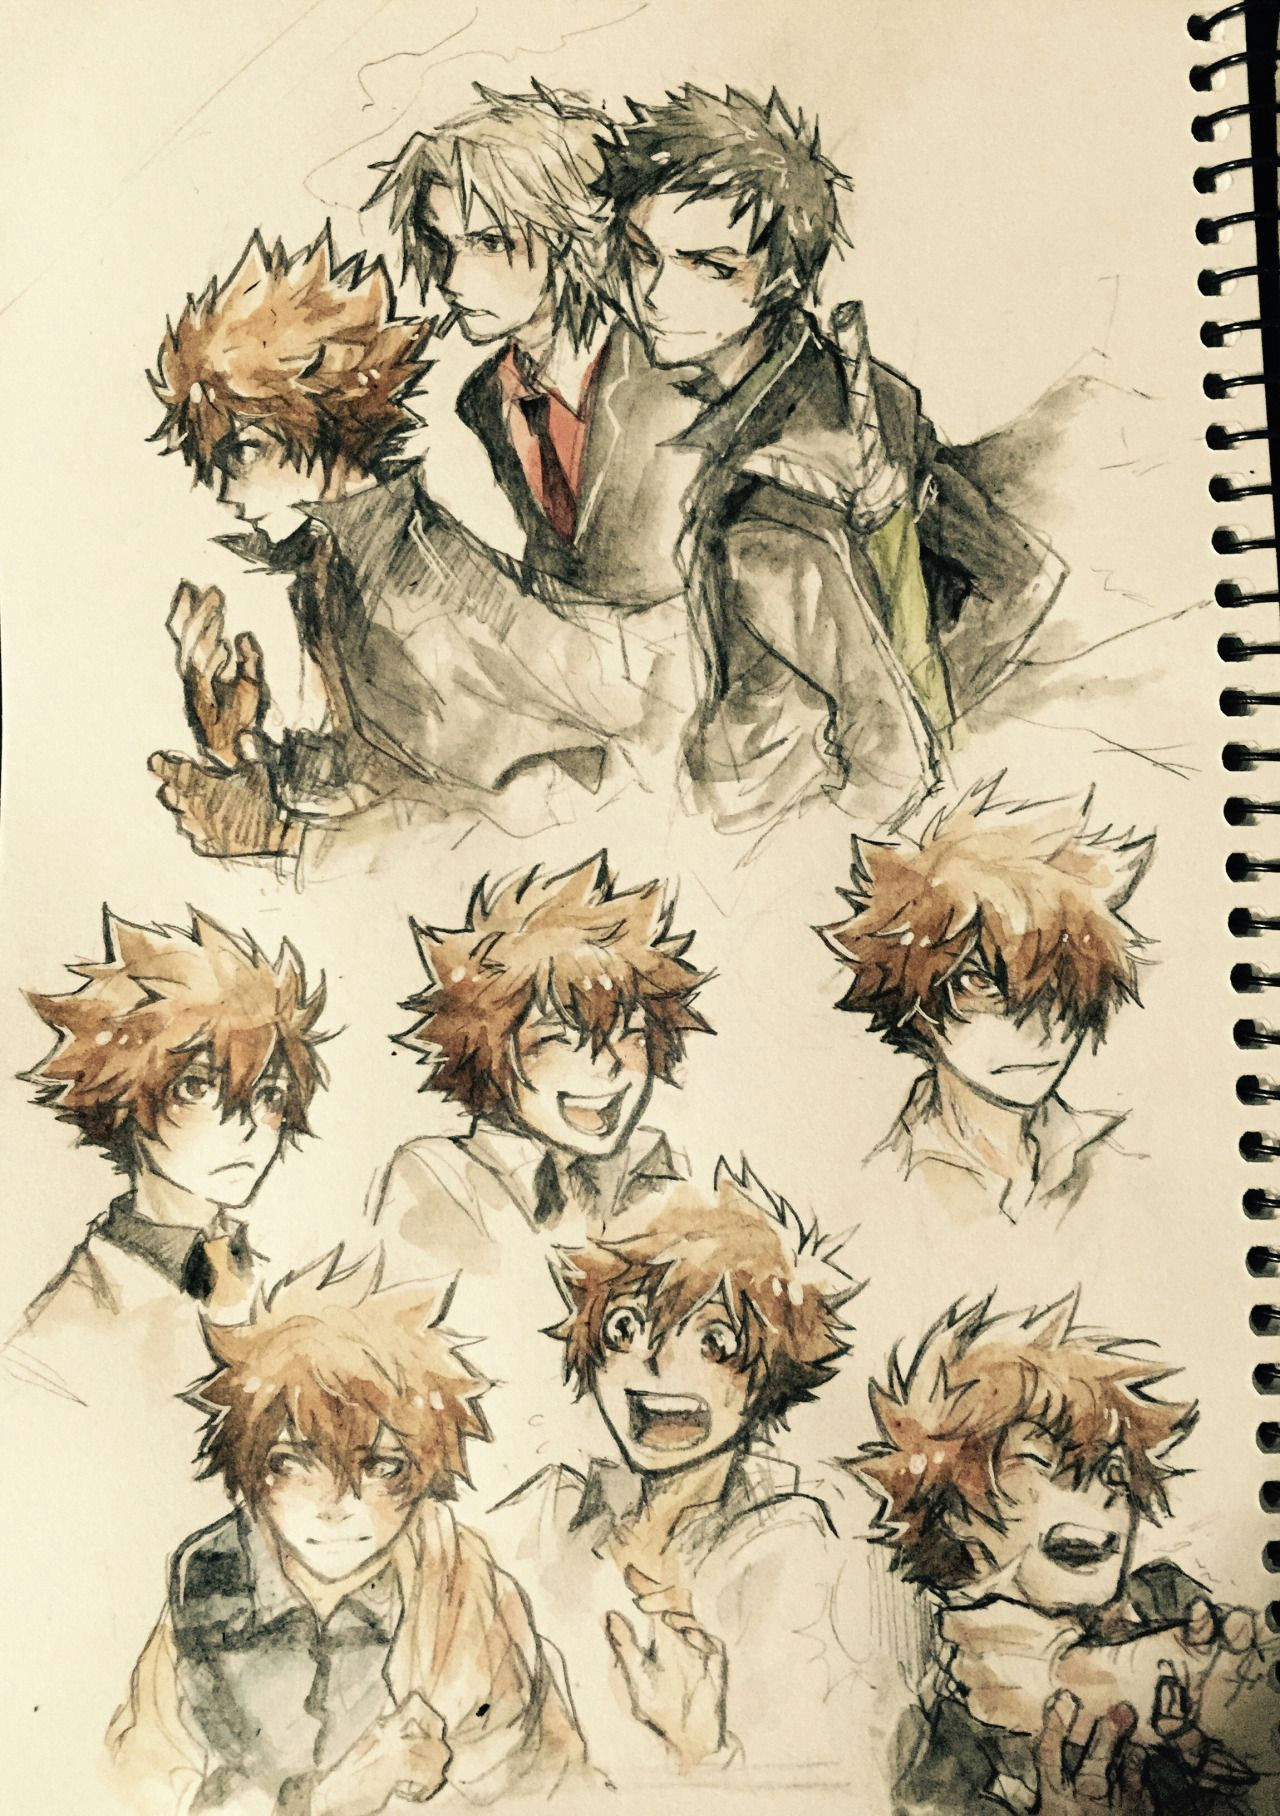 my sketchbook is like 90 tsuna by now sweats here s a bunch of older tsunas because